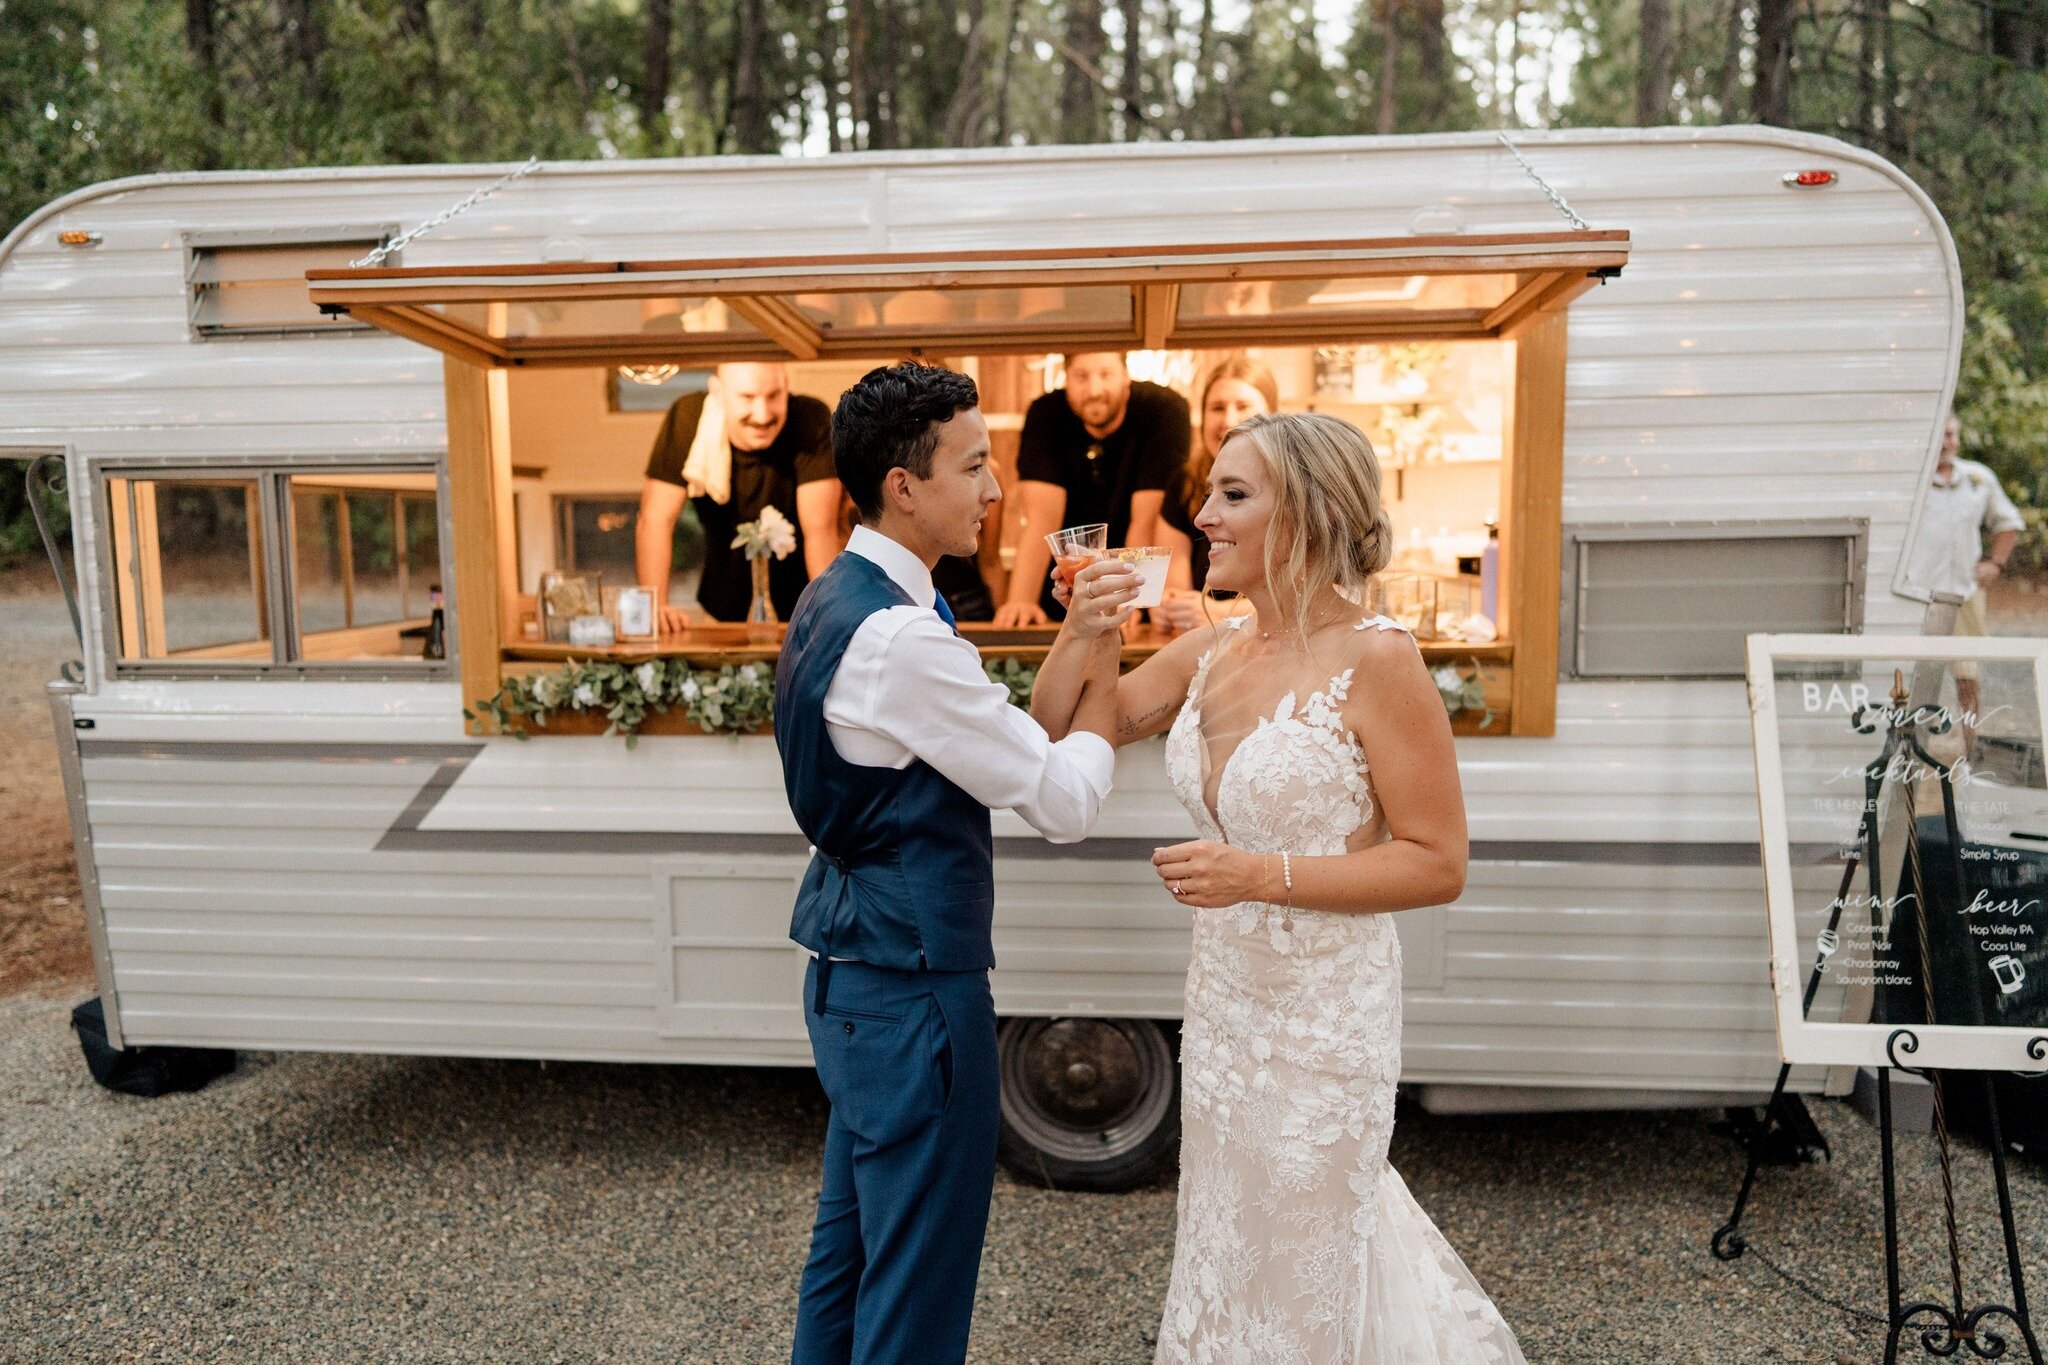 The SideCar Mobile Bar is included with all of our weddings, and also includes at least 2 bartenders, depending on the size of your event. 
 #mobilebar #mobilebars #mobilebarservice #weddings #chicoweddings #chicobrides #chicoweddingvenues #forestran